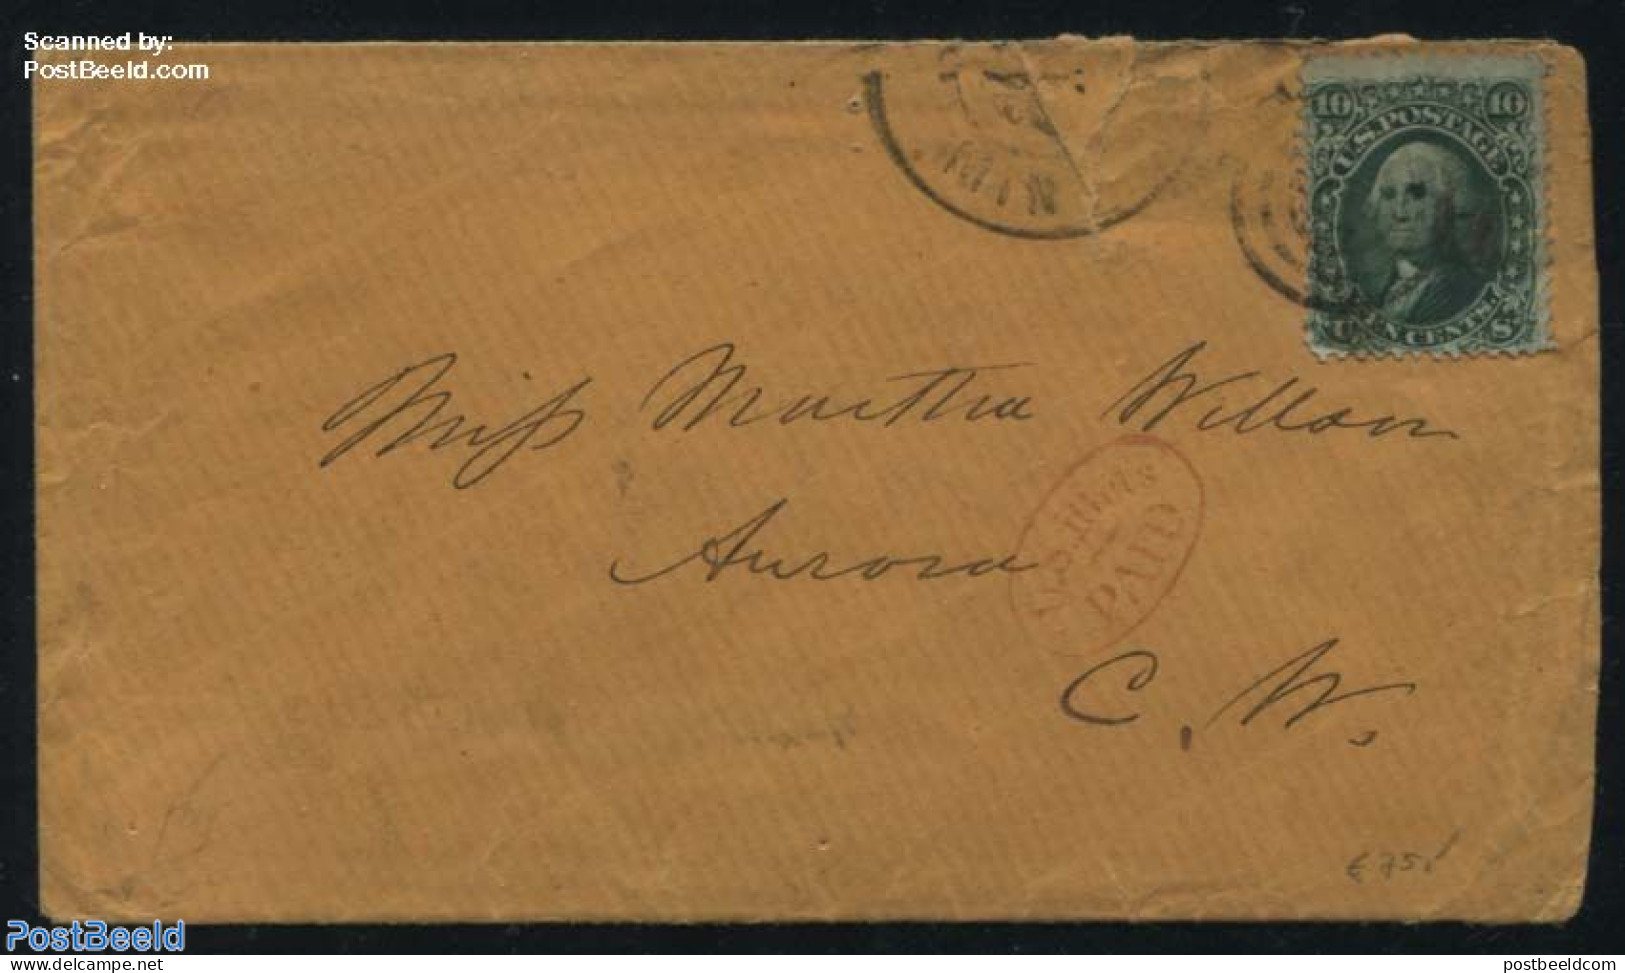 United States Of America 1864 Letter To Aurora With 10c Green, Postal History - Briefe U. Dokumente